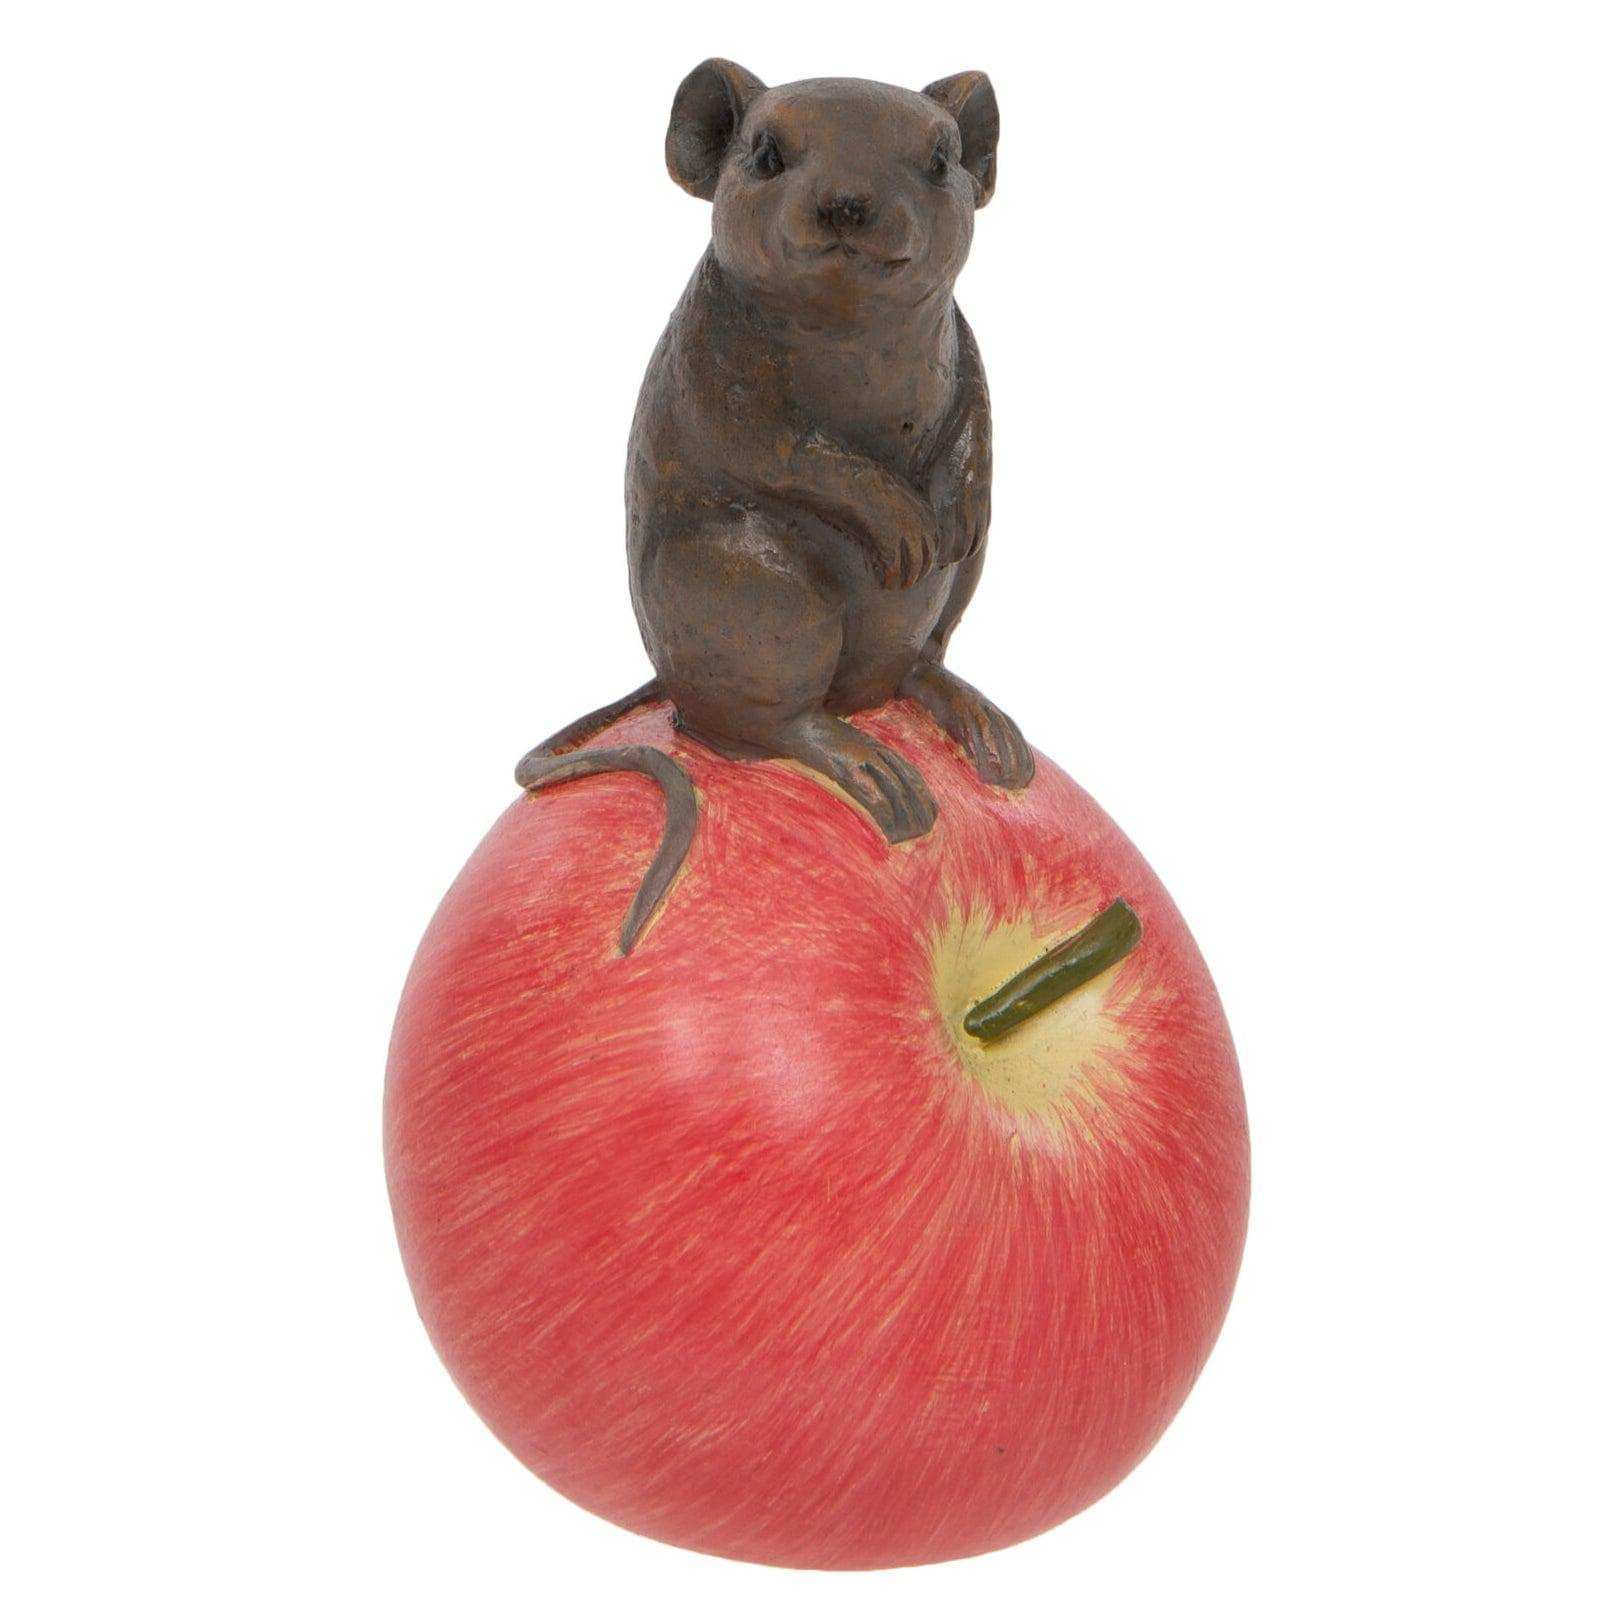 Mouse On Apple Ornament - The Farthing